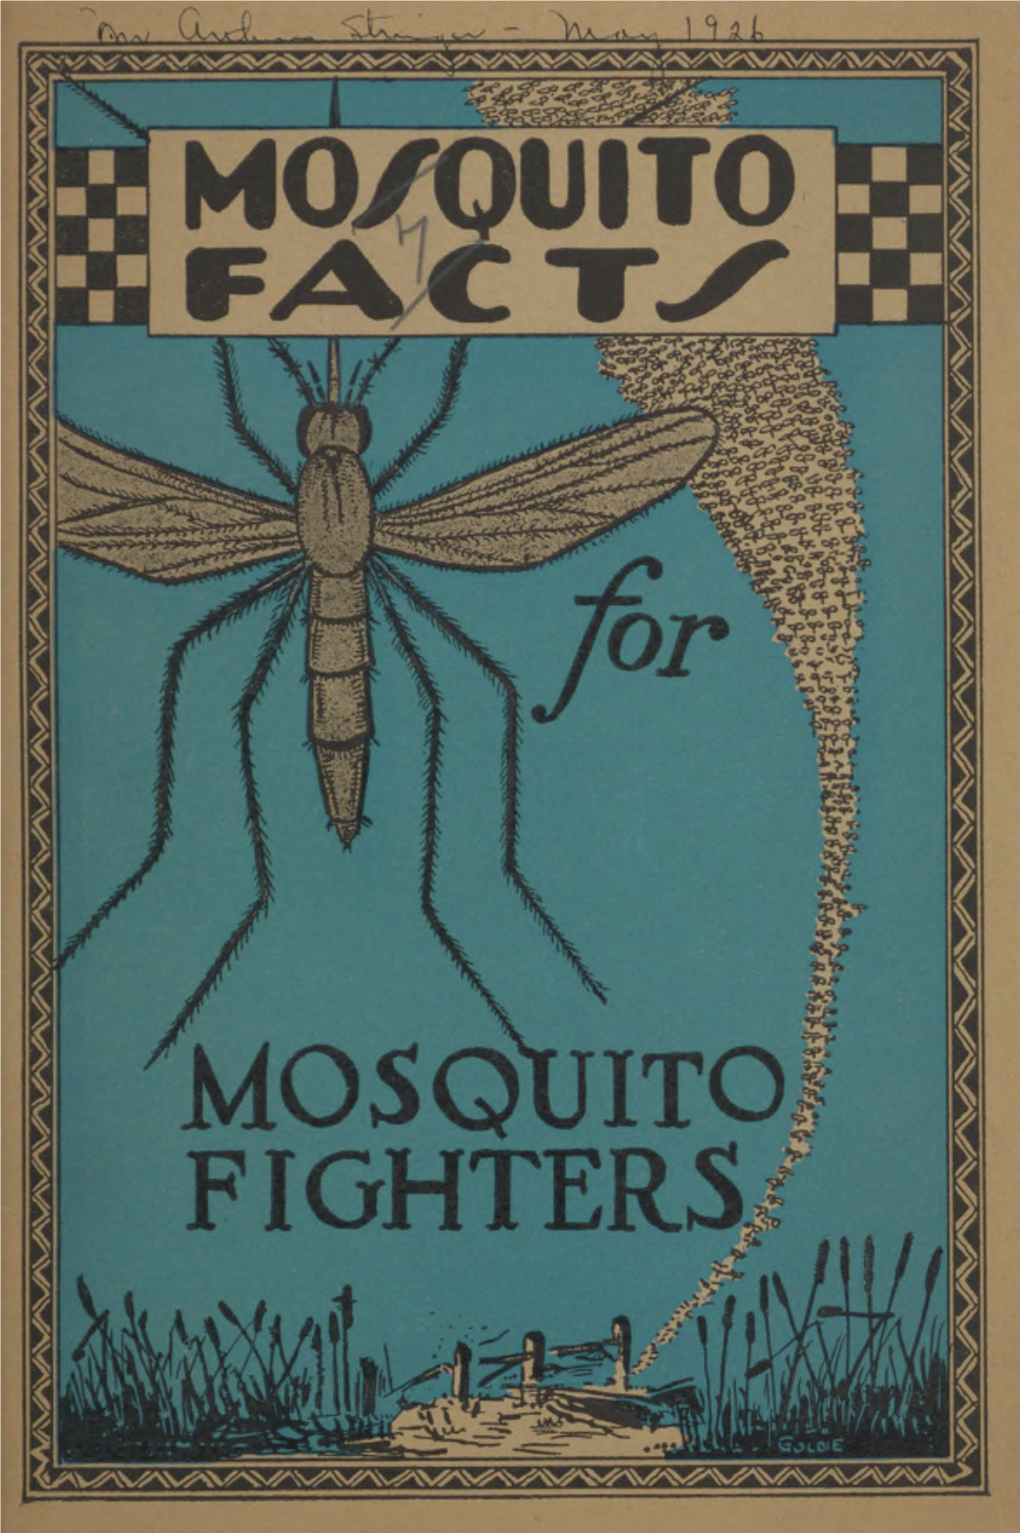 Mosquito Facts for Mosquito Fighters